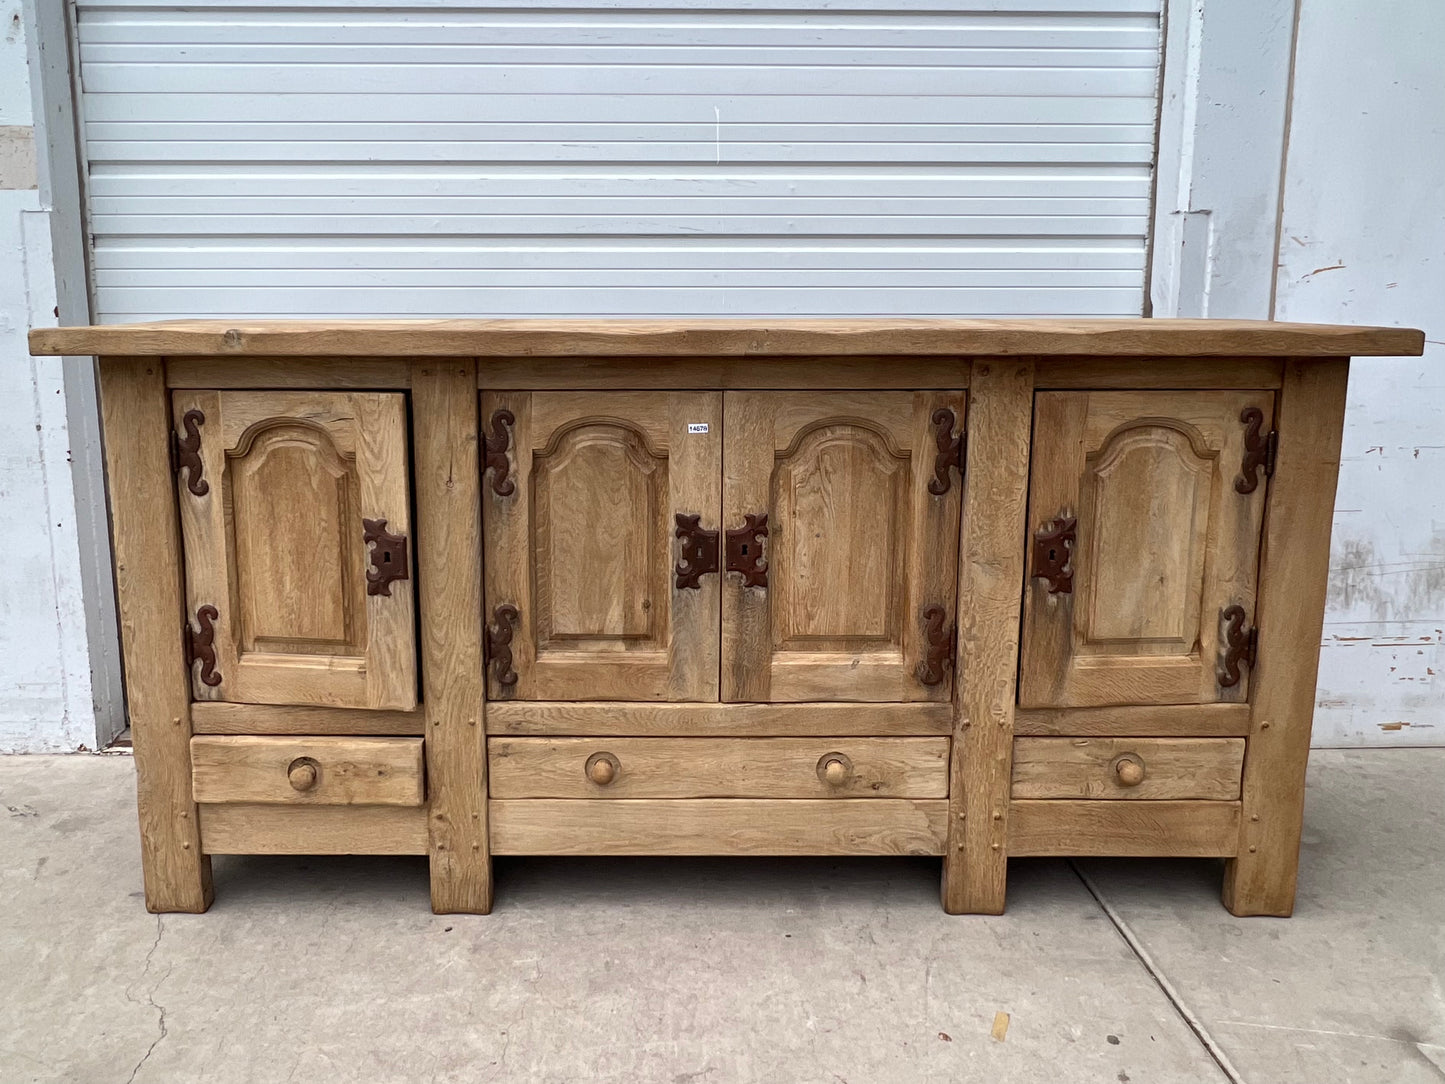 Paneled Bleached Antique Sideboard